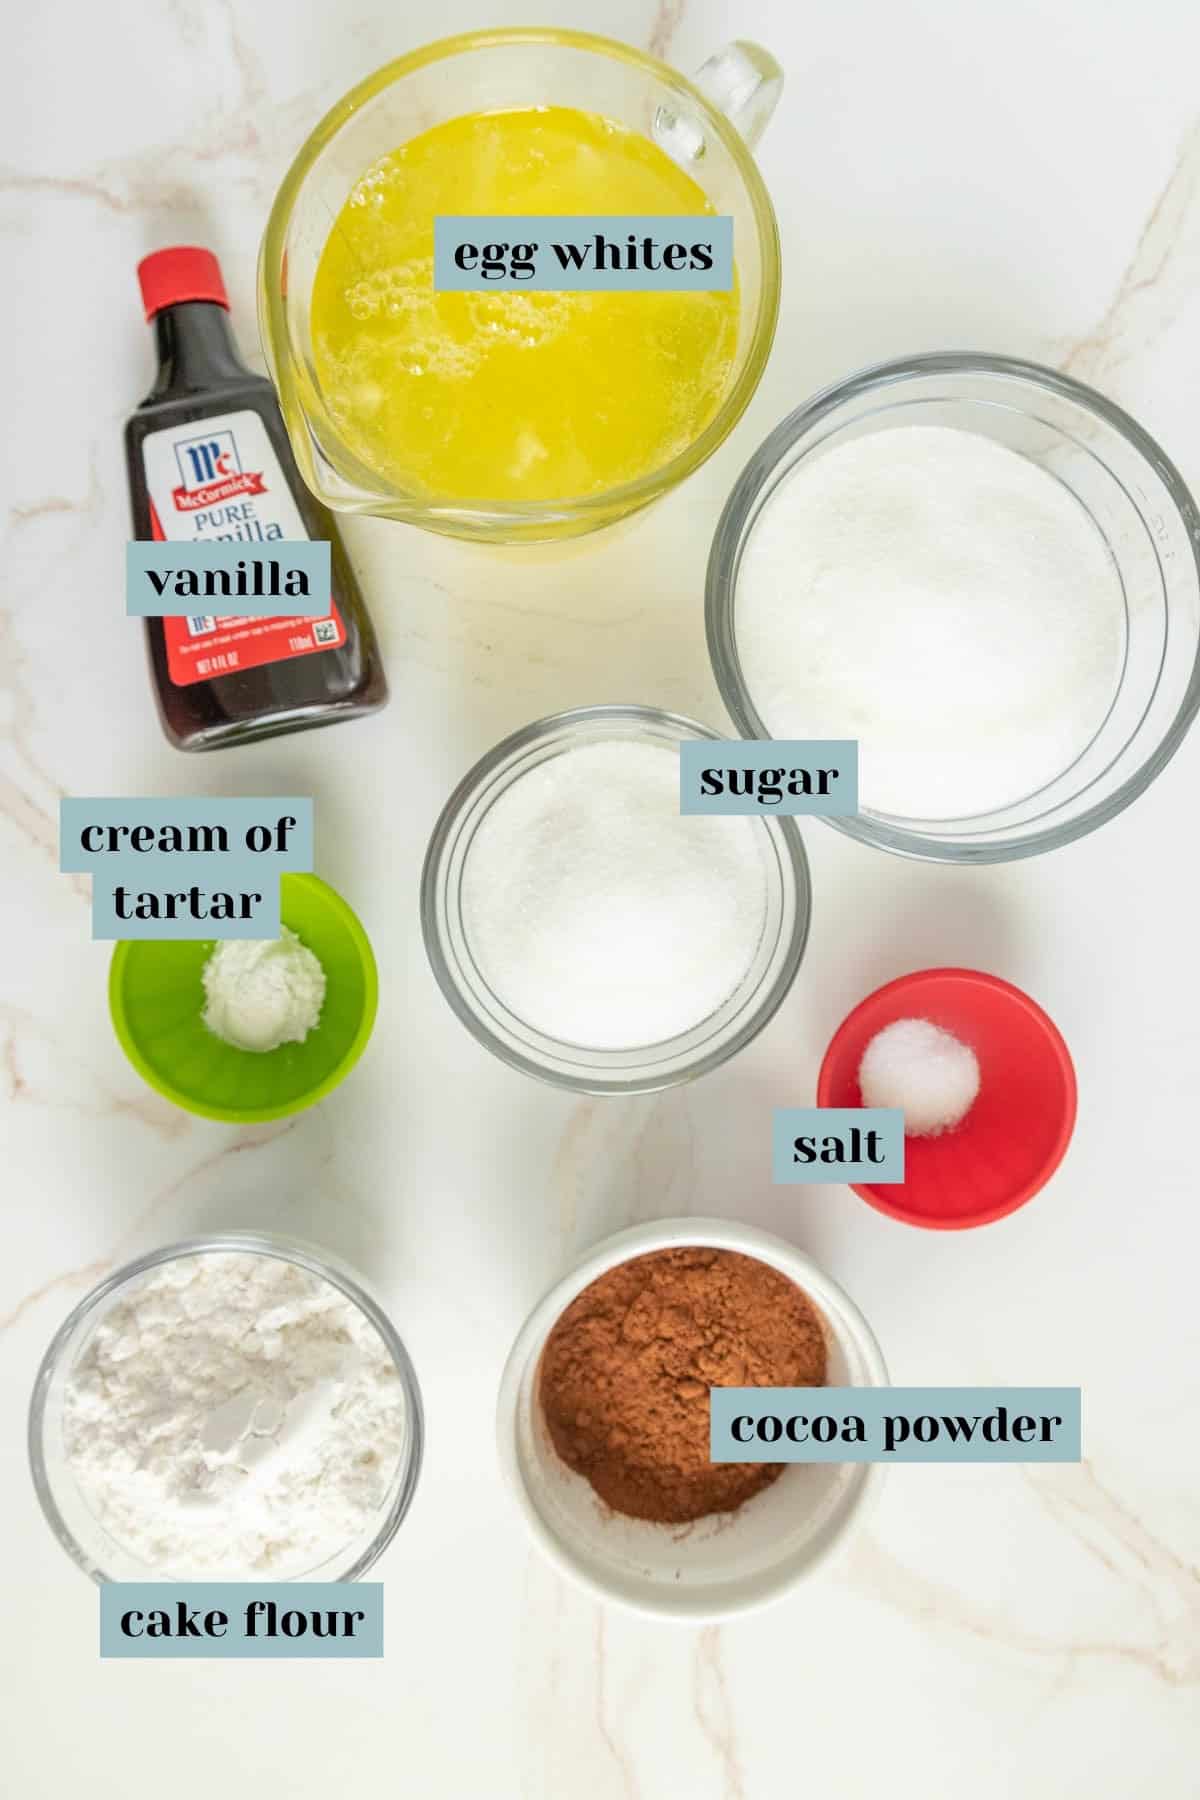 Overhead view of ingredients for baking arranged on a marble surface. Includes egg whites, vanilla extract, sugar, salt, cream of tartar, cocoa powder, and cake flour, each labelled.